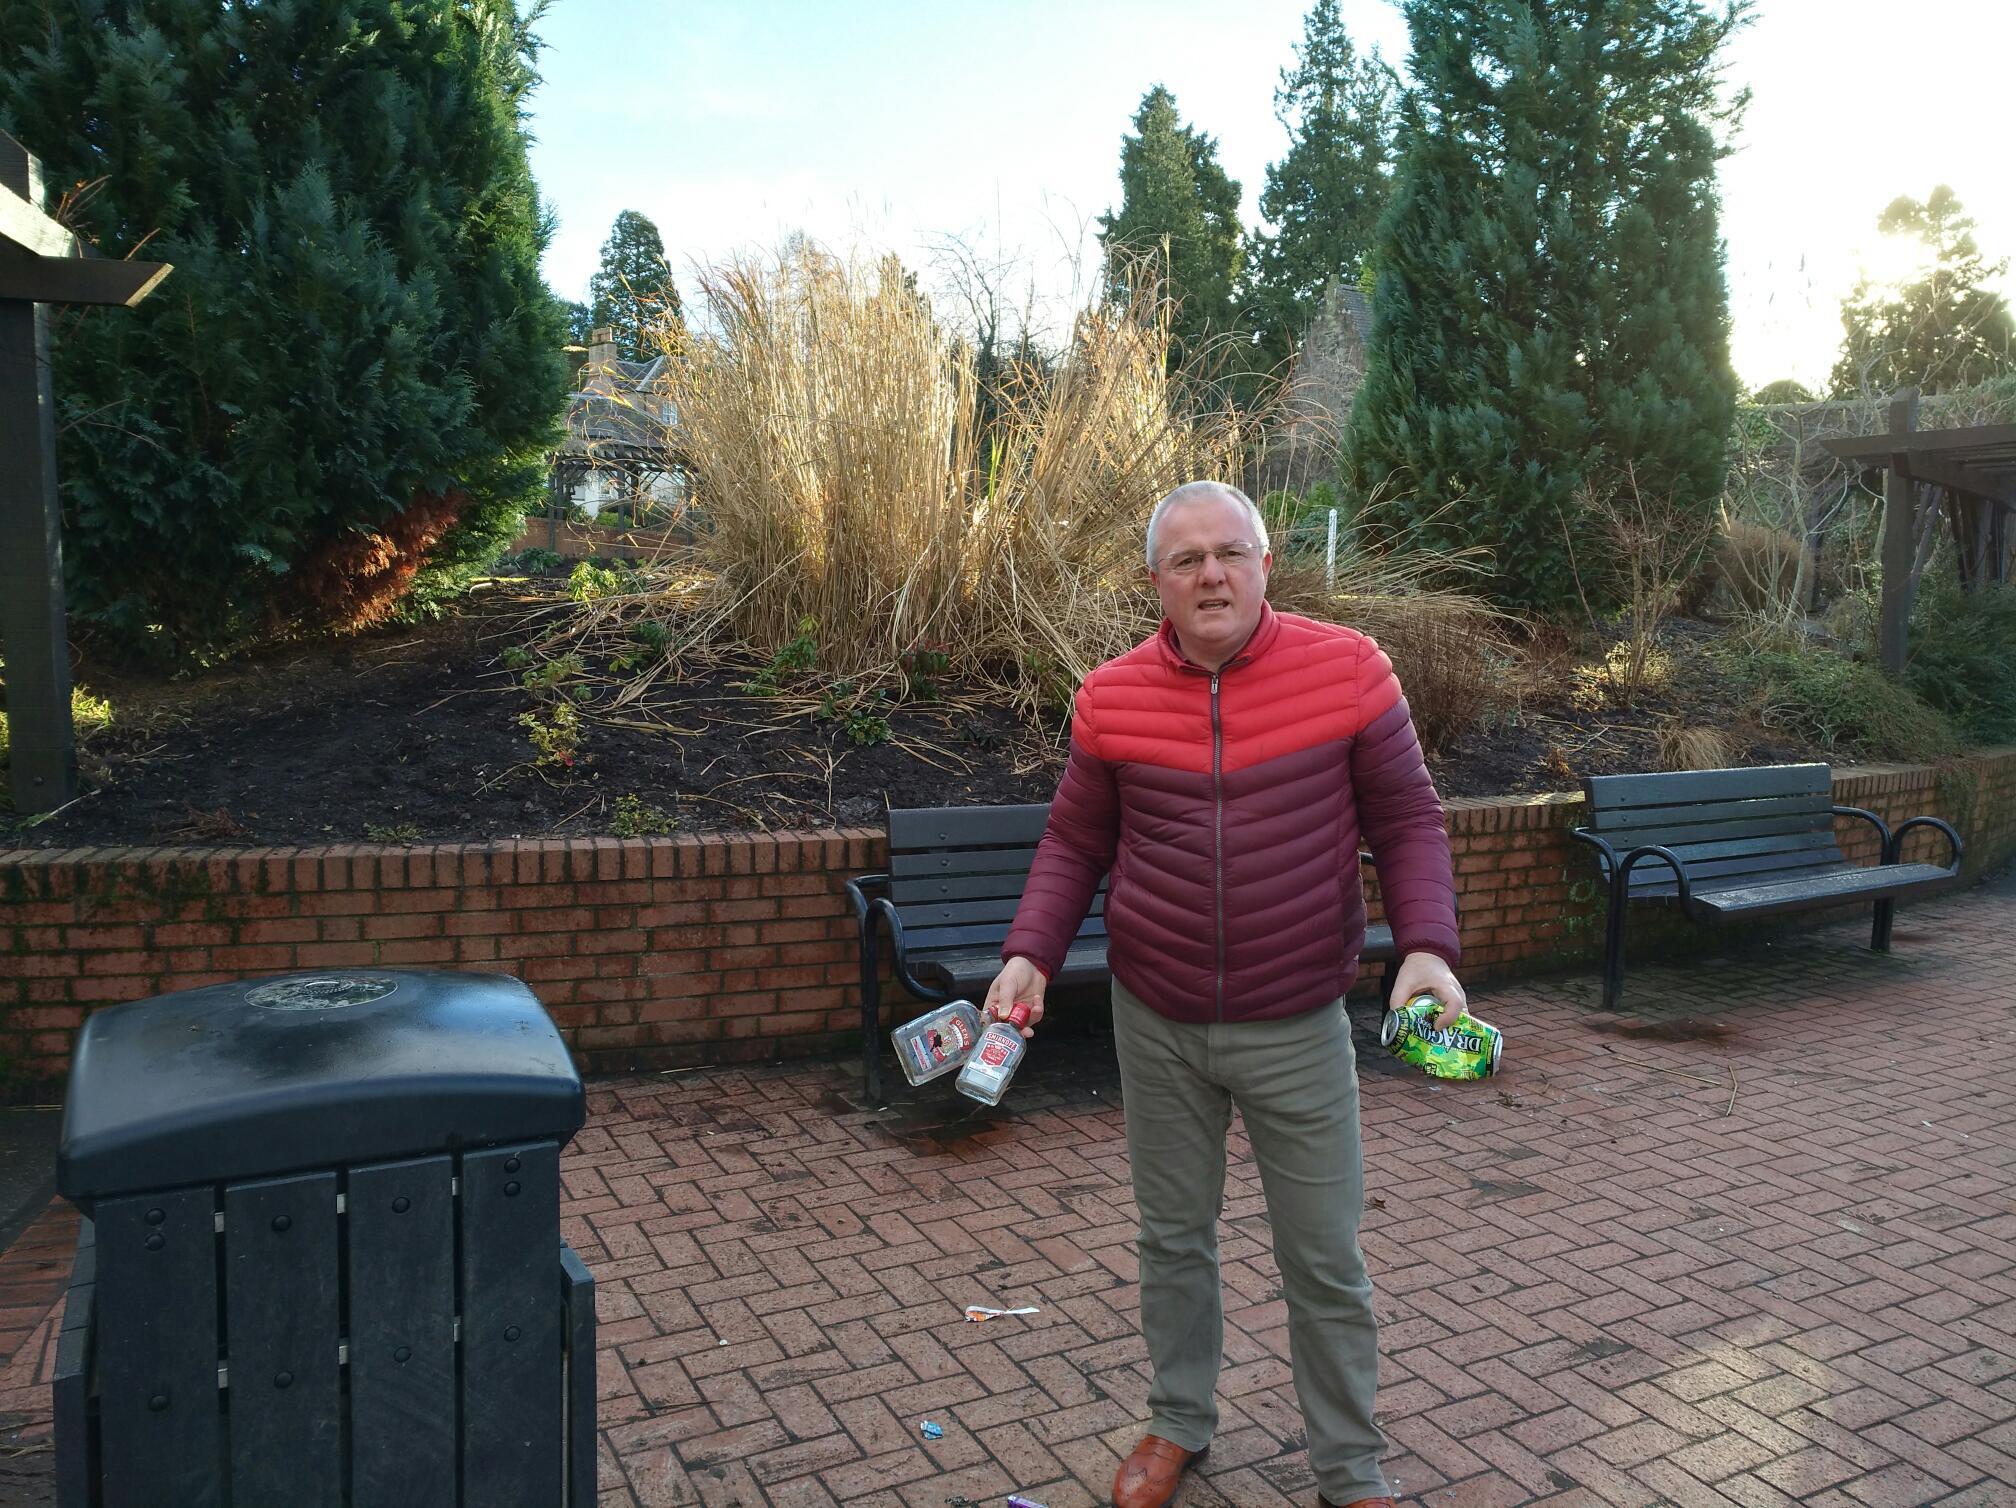 Councillor Peter Barret helps clear up some of alcohol bottles left discarded after another night of underage drinking.